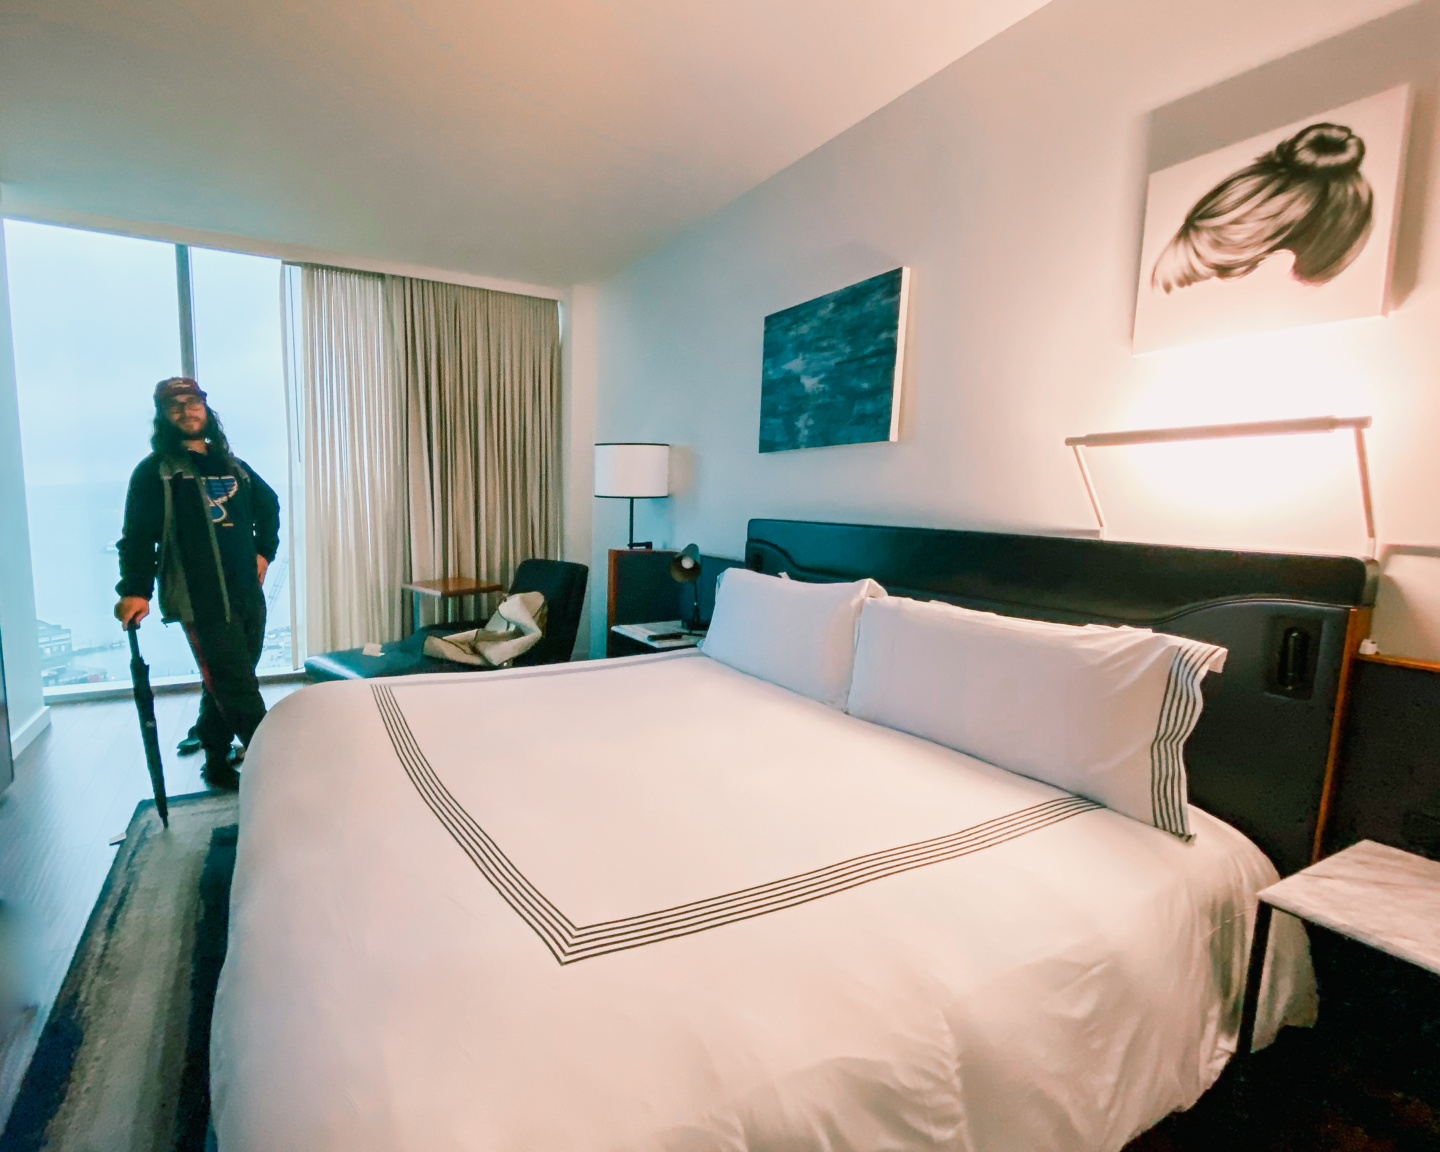 Thompson Hotels – Where to Stay in Seattle